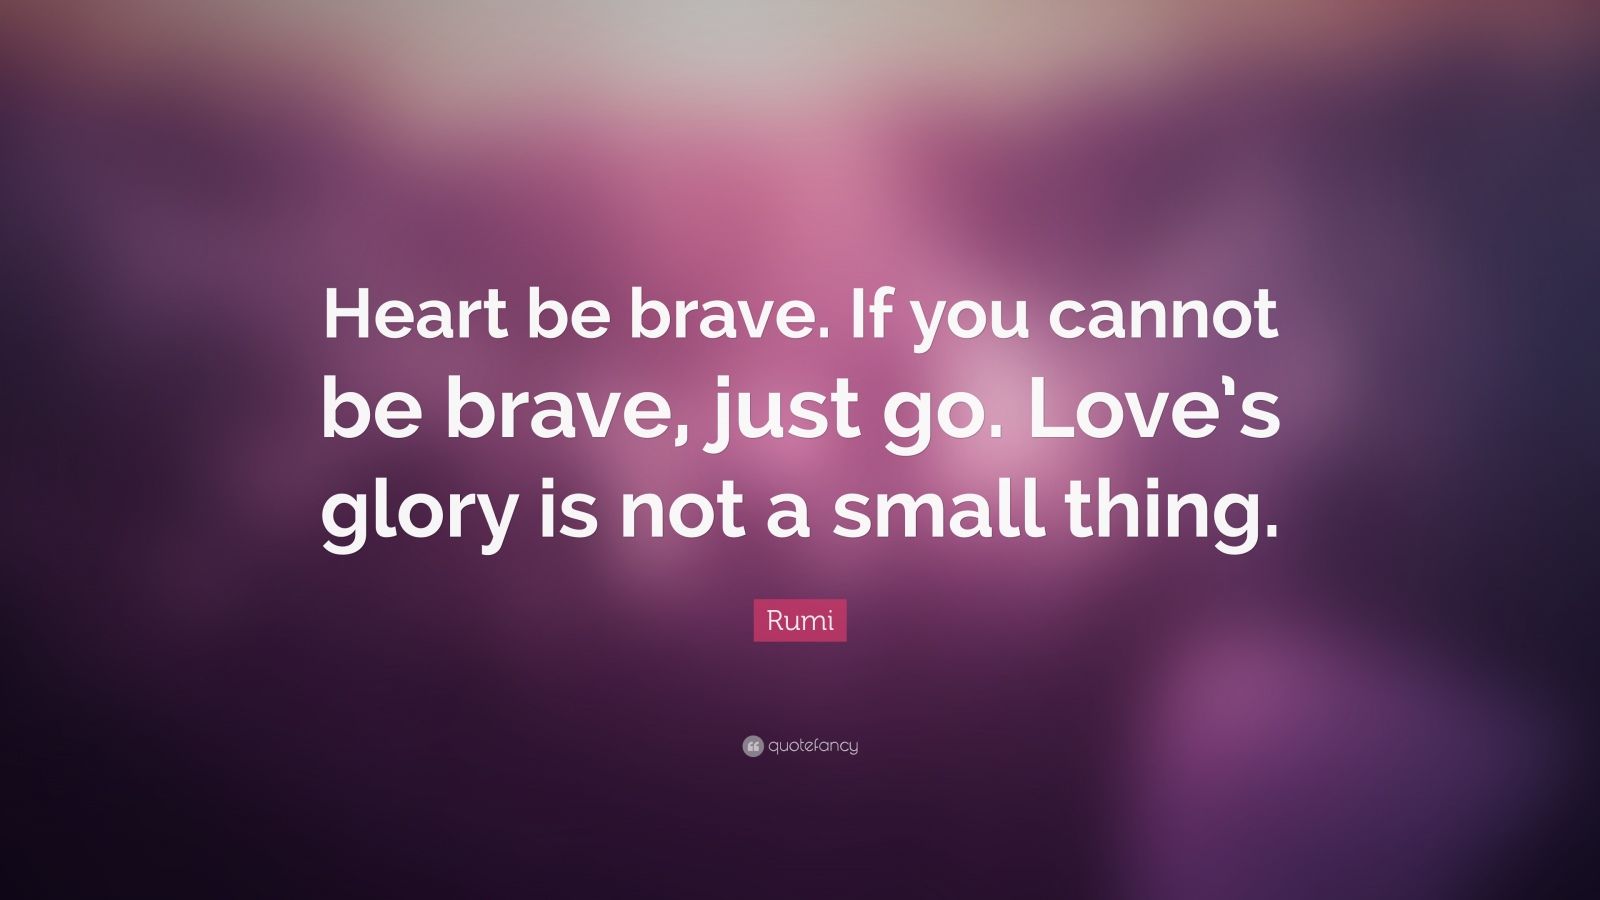 Rumi Quote “Heart be brave If you cannot be brave just go